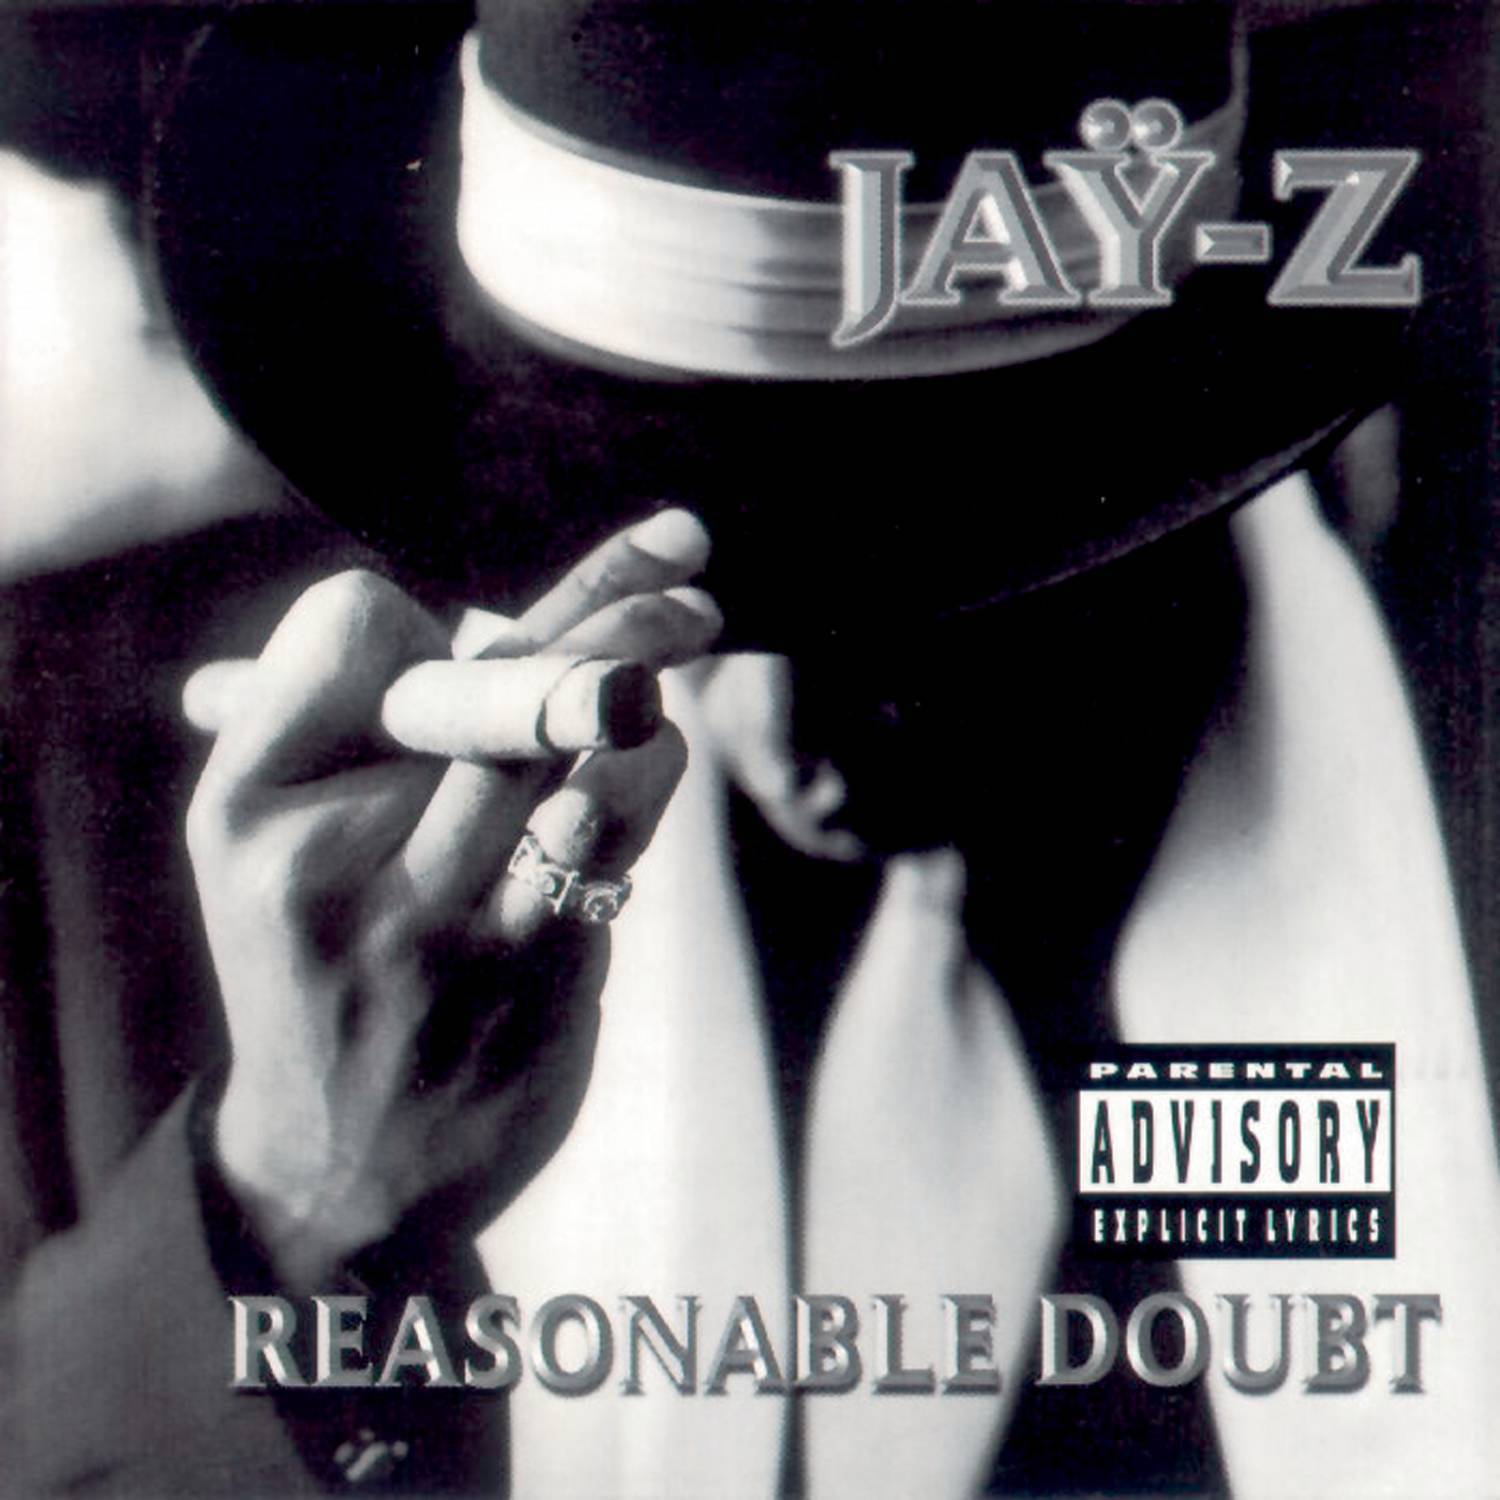 Can't Knock The Hustle歌词 歌手Jay-Z / Mary J. Blige-专辑Reasonable Doubt-单曲《Can't Knock The Hustle》LRC歌词下载